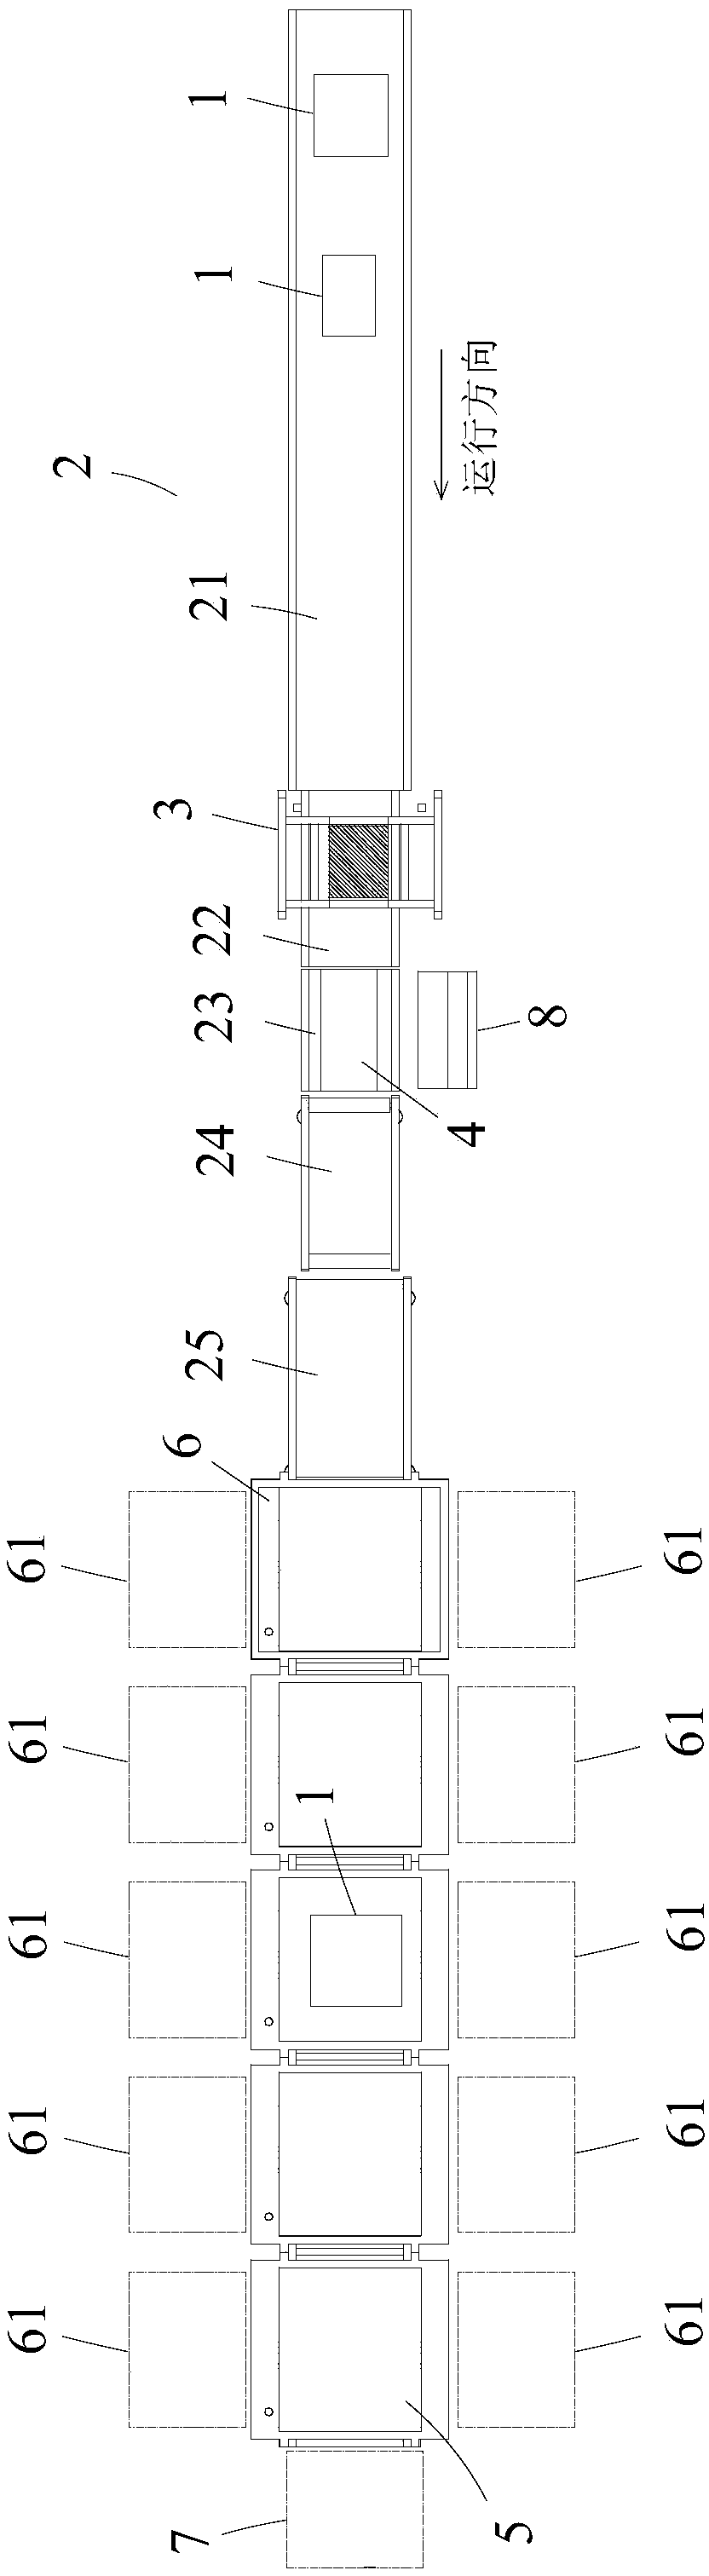 Logistics automatic sorting system and method